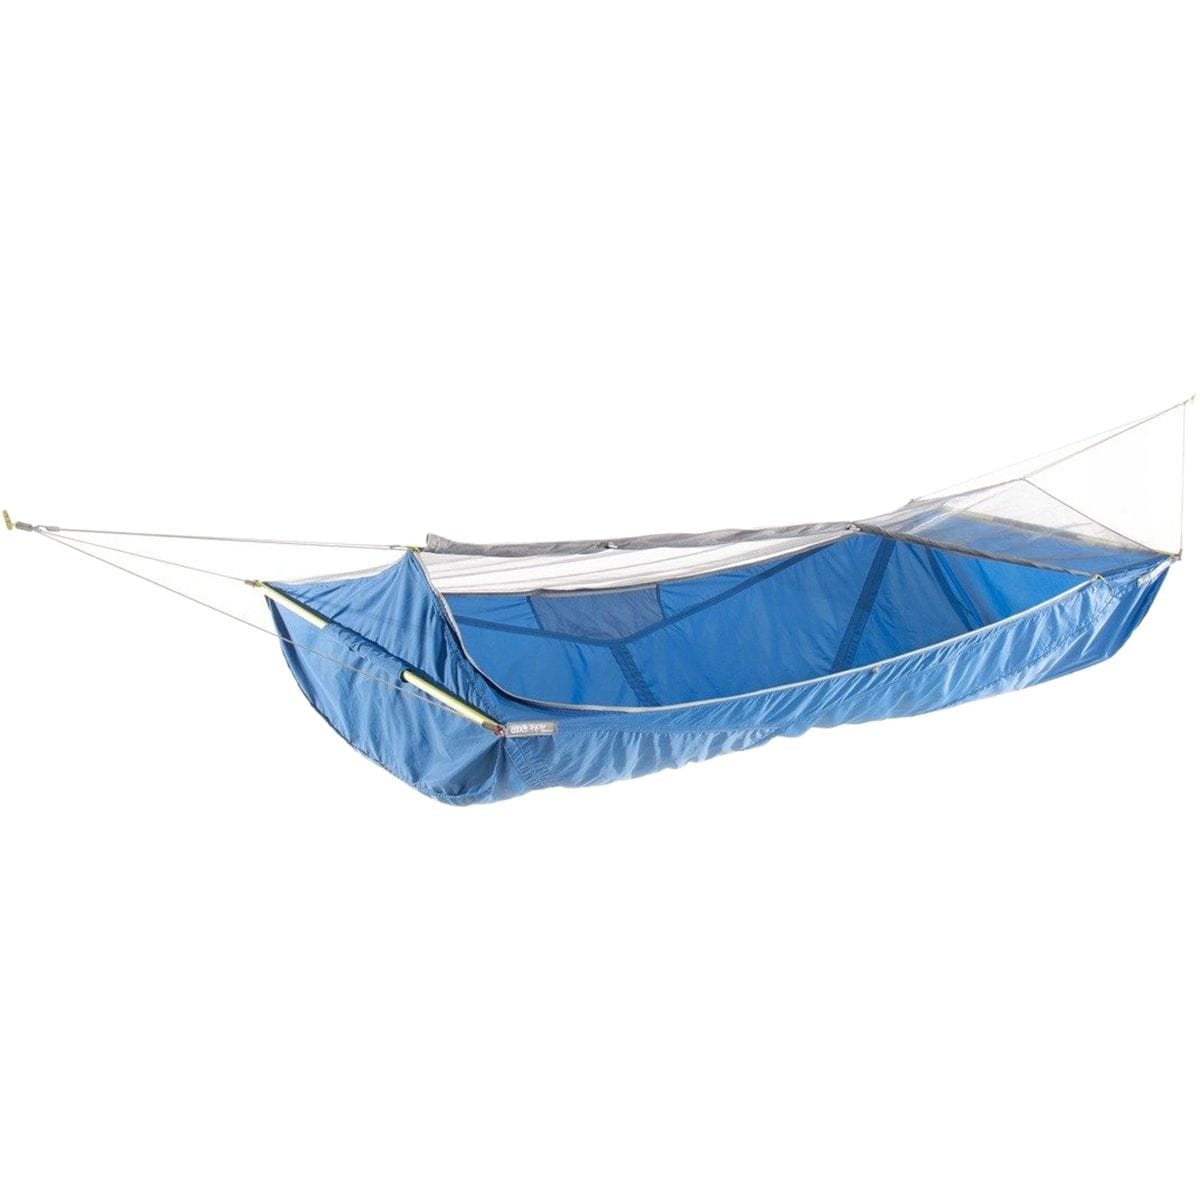  Eagles Nest Outfitters SkyLite Hammock - Hike & Camp